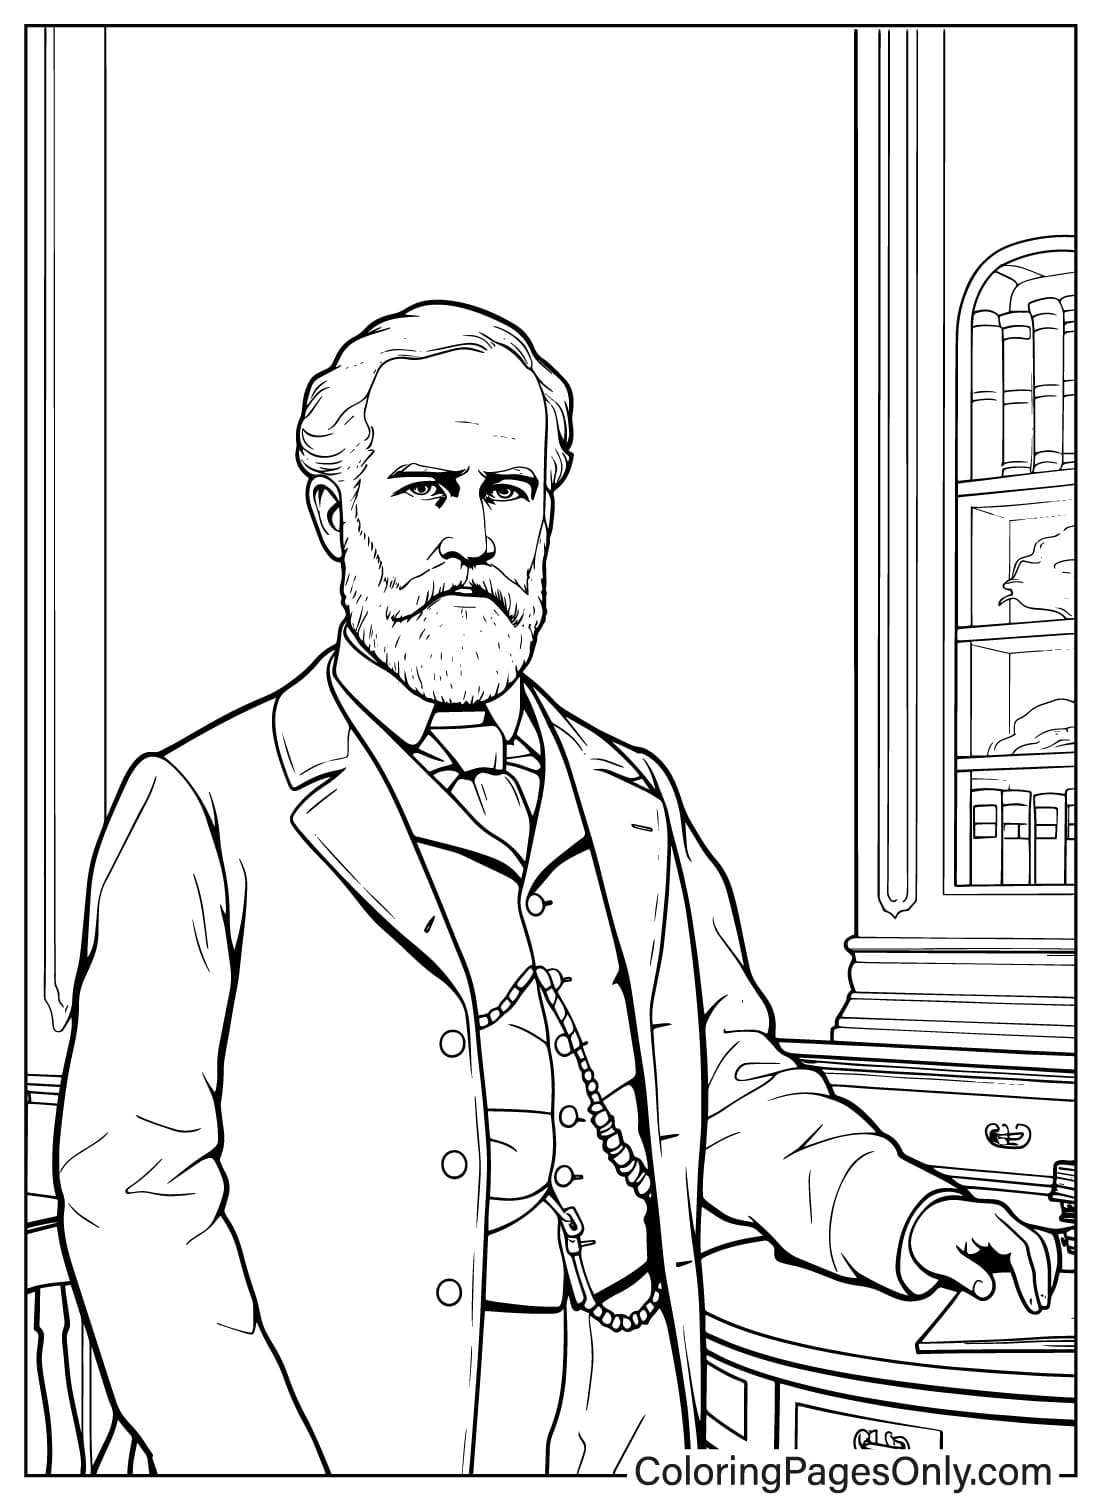 Robert E. Lee Coloring Page from Robert E. Lee